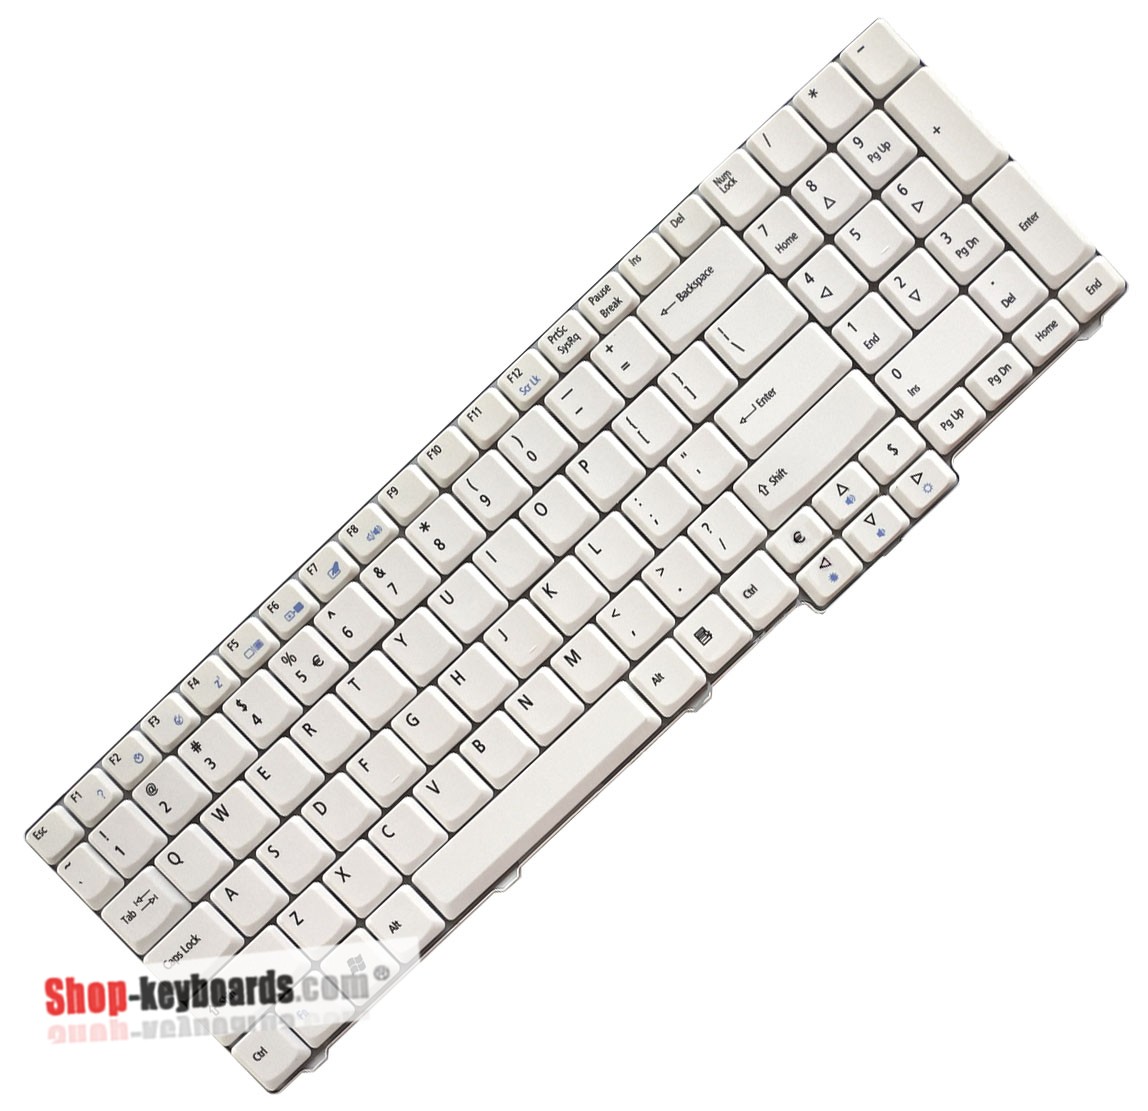 CHICONY 9J.N8782.30U Keyboard replacement